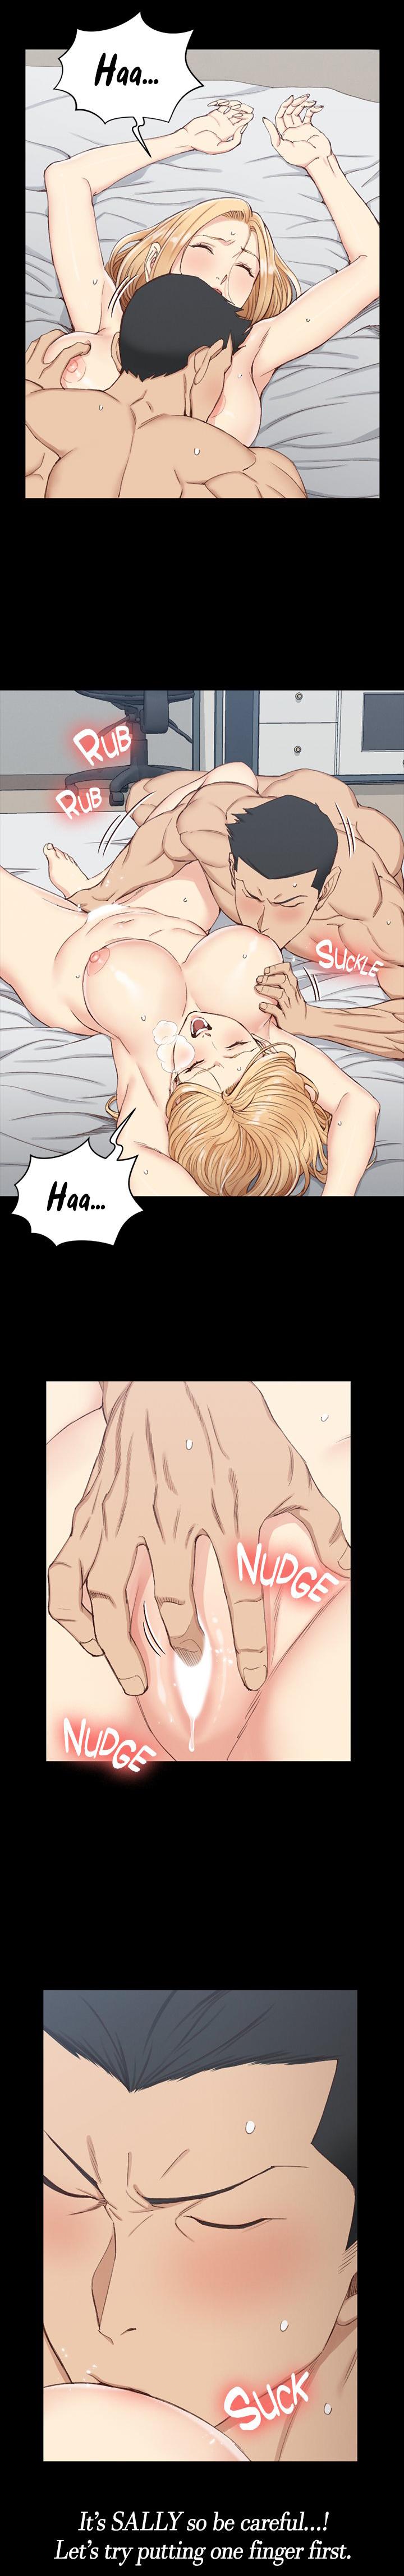 Jerk That Man's Room/His Place Ch. 121-122 Love Making - Page 8